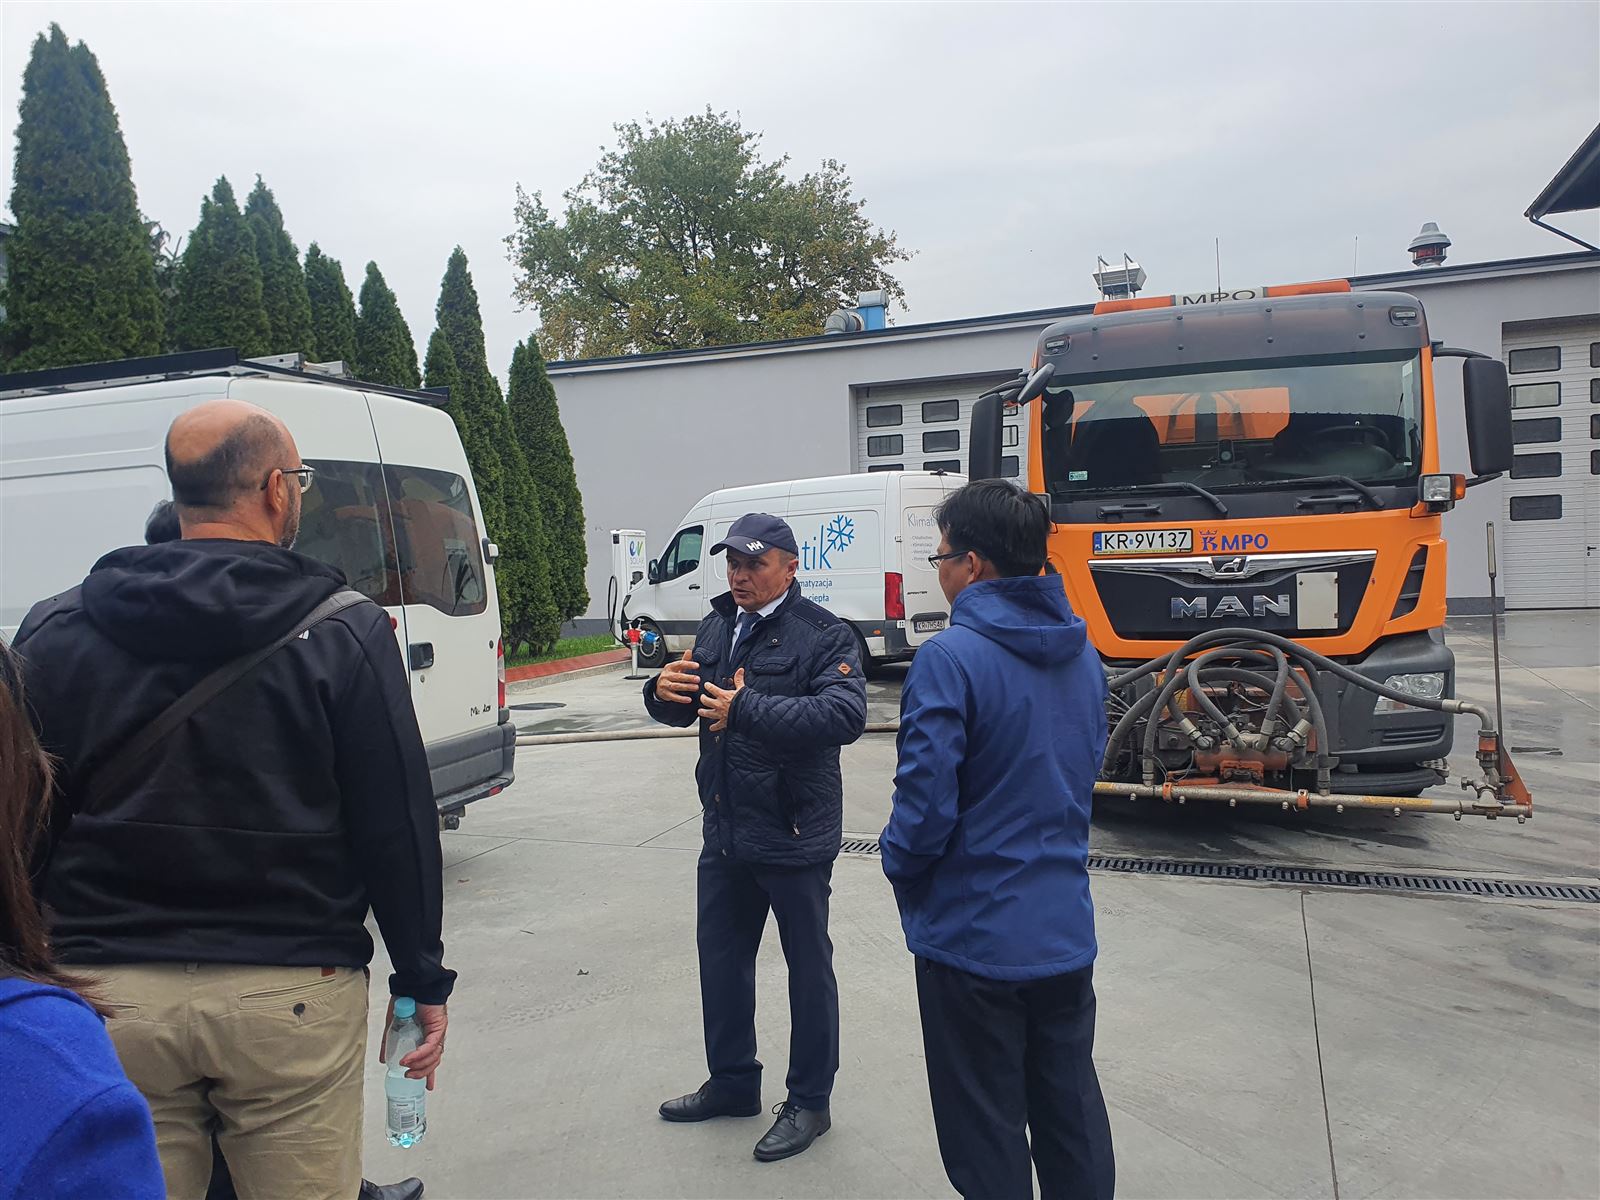 Technical visit to MPO waste management company, Krakow, 11/10/22         